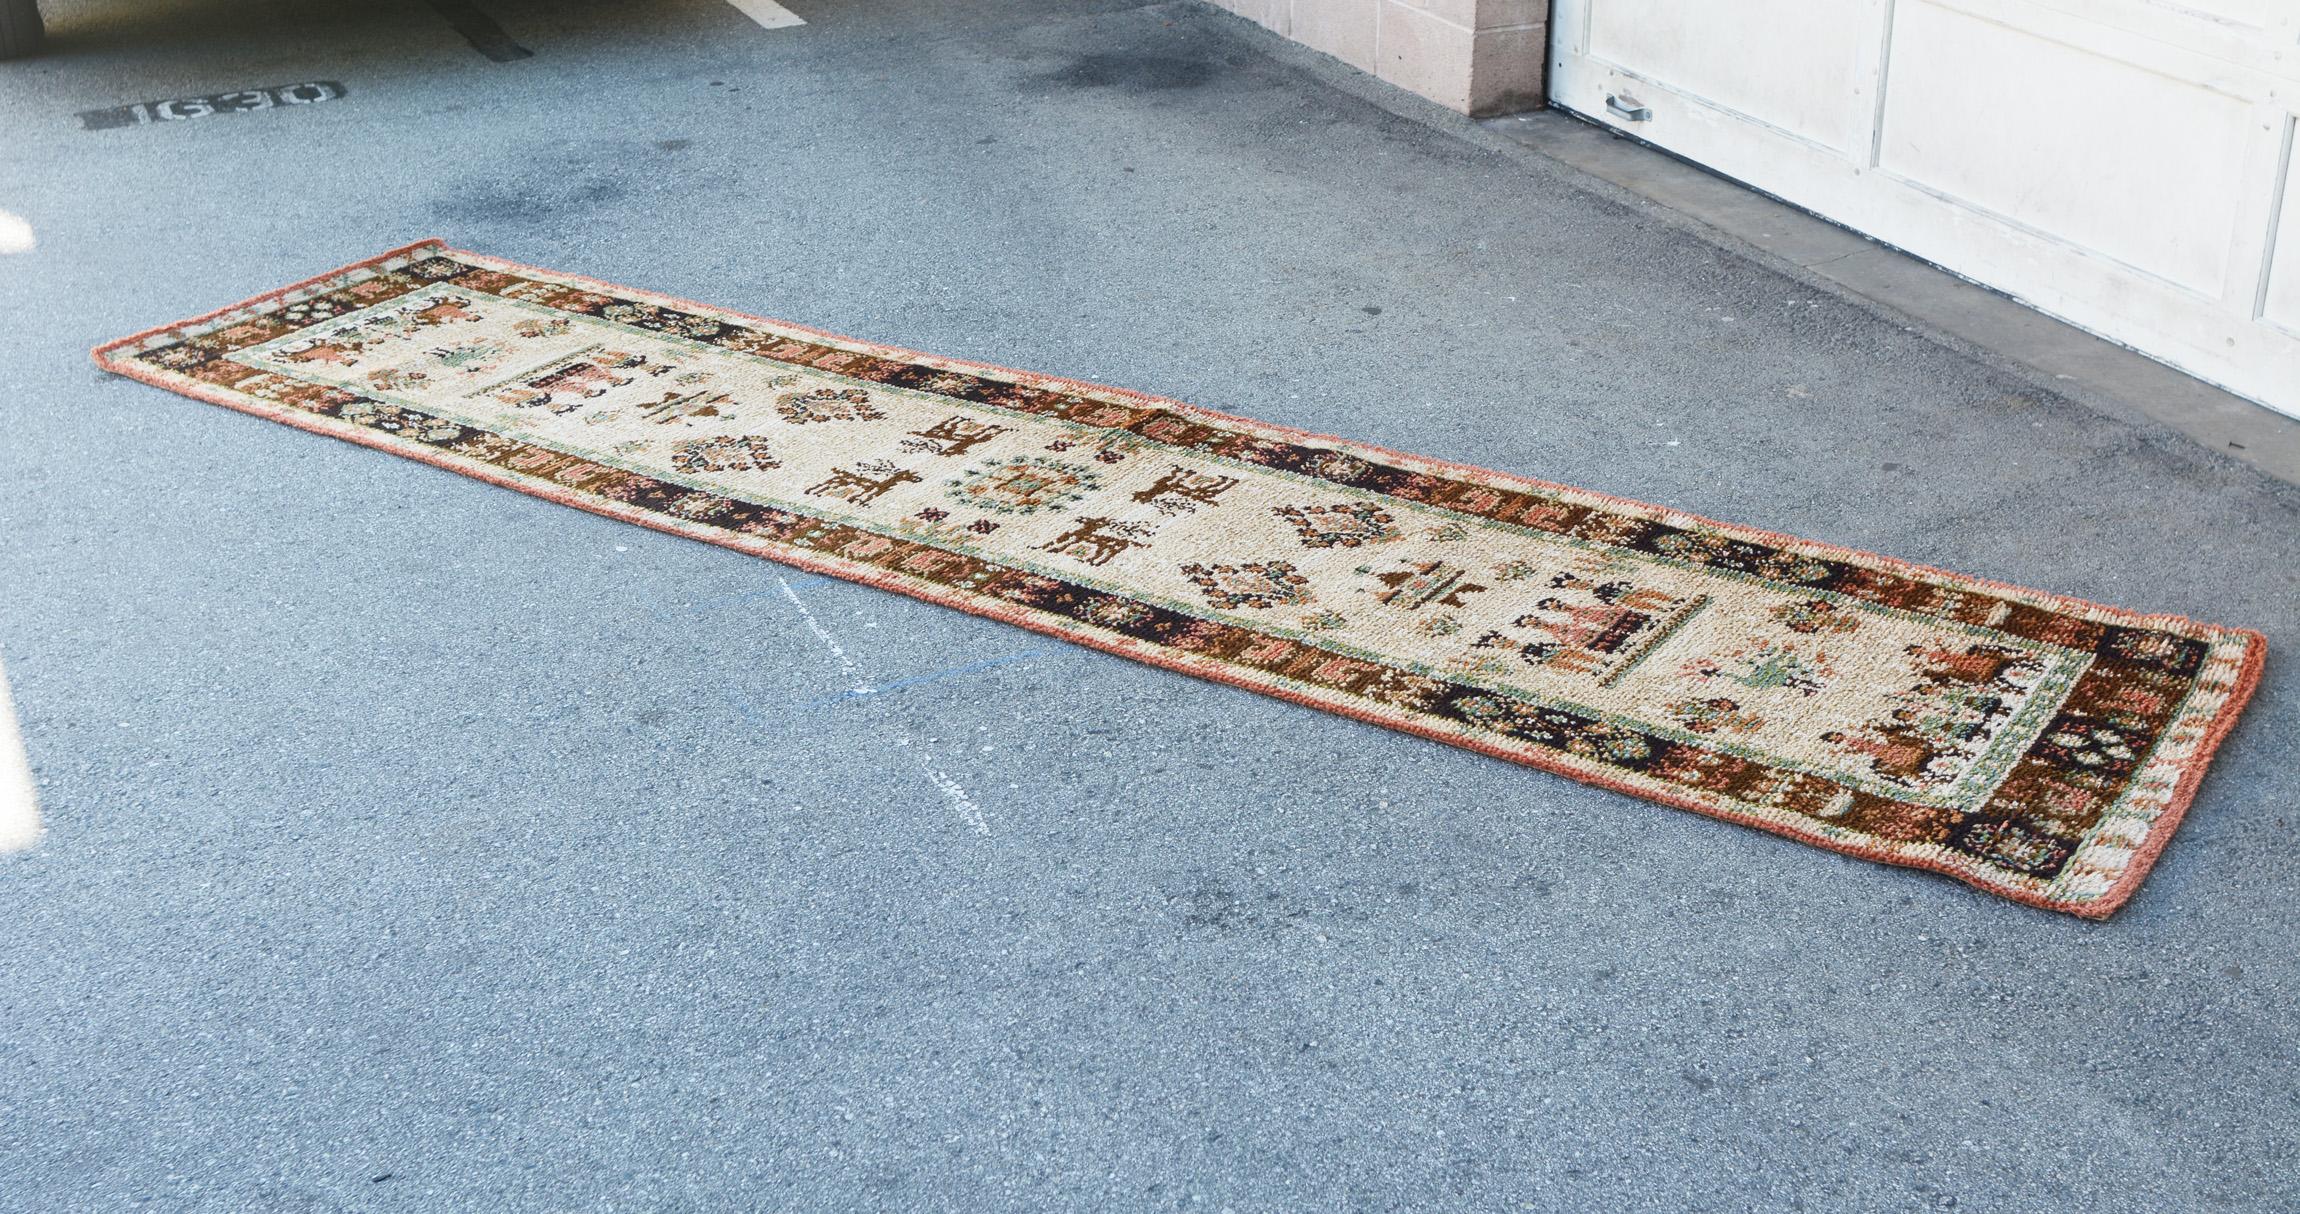 Eleven and half foot long 100% wool runner by Ege Axminster. This is part of the Ege Country series and titled Mountain Life. This whimsical rug depicts elements of traditional life in Denmark's mountains. The pile is a half inch thick. There are no